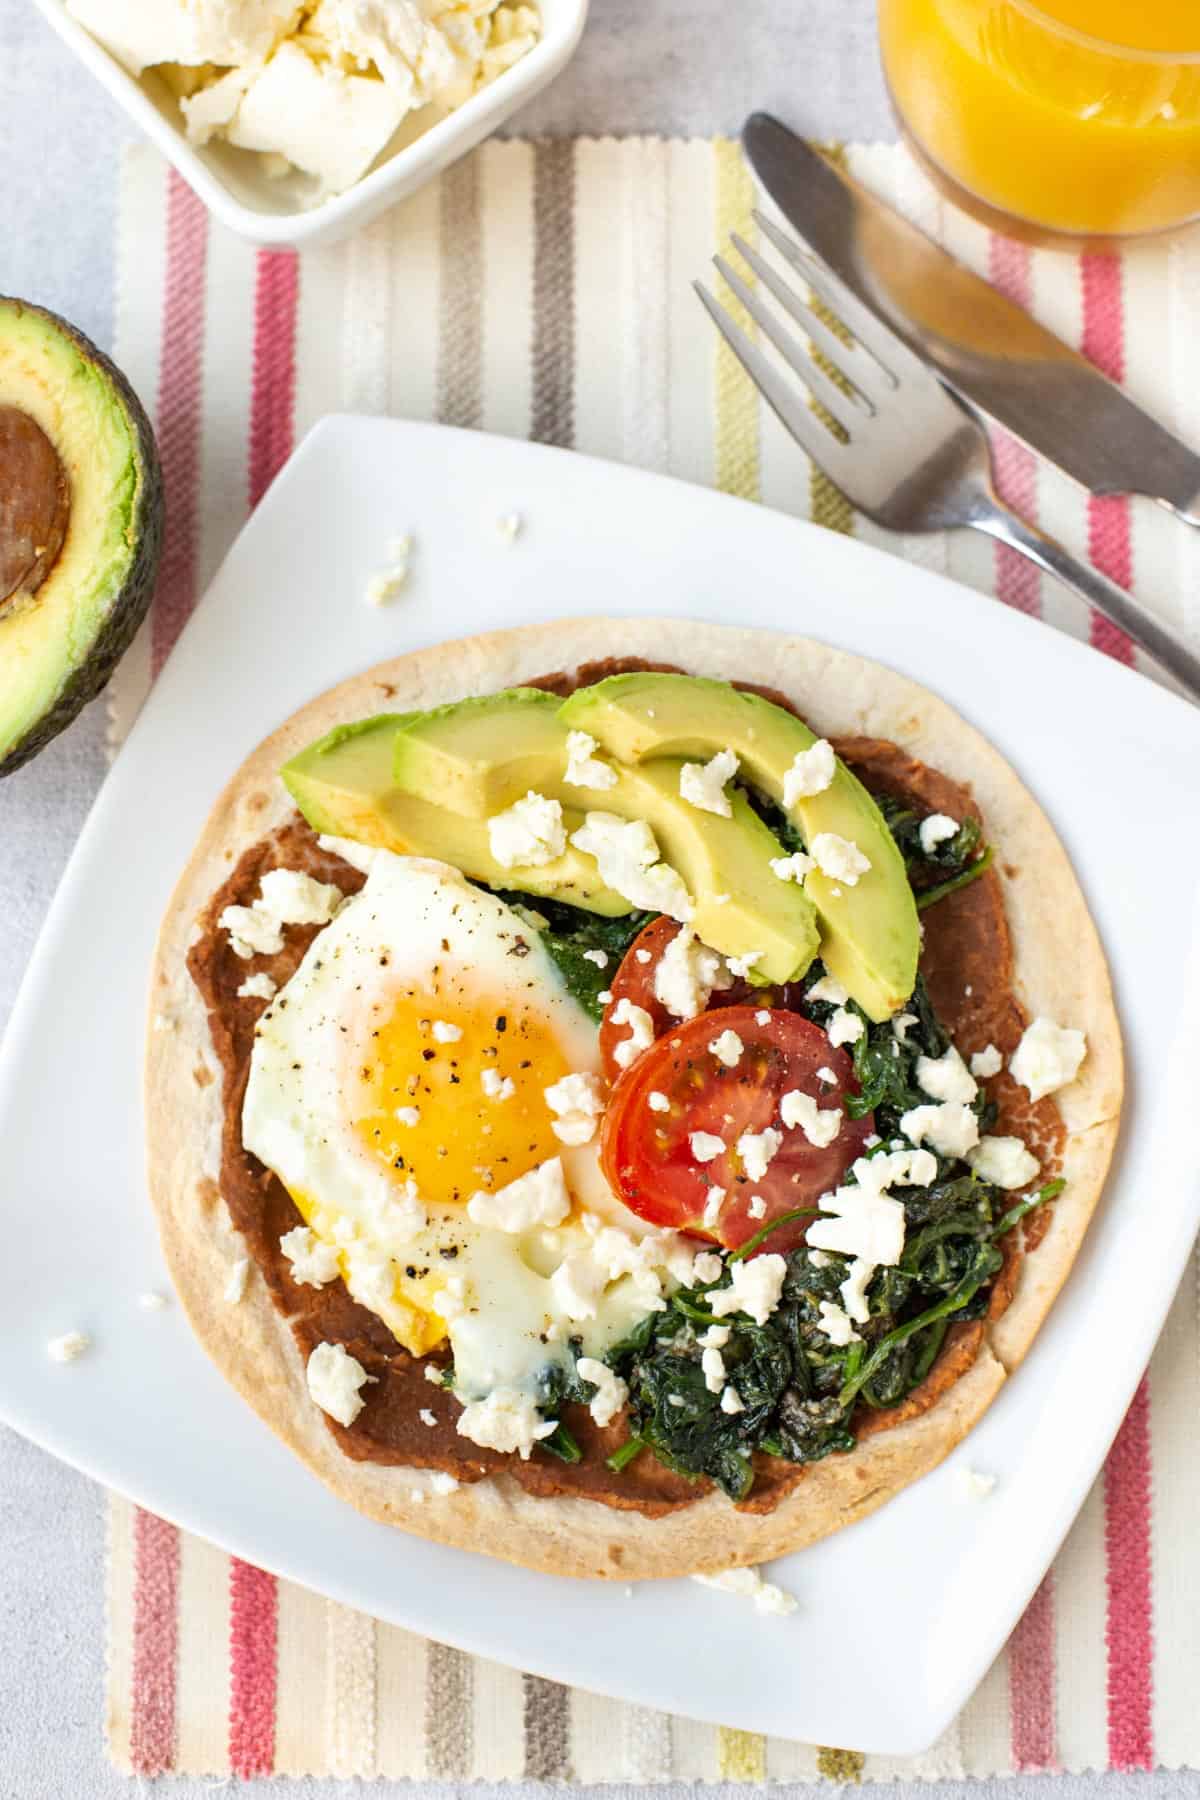 A breakfast tostada on a plate, topped with sliced avocado and crumbled feta.